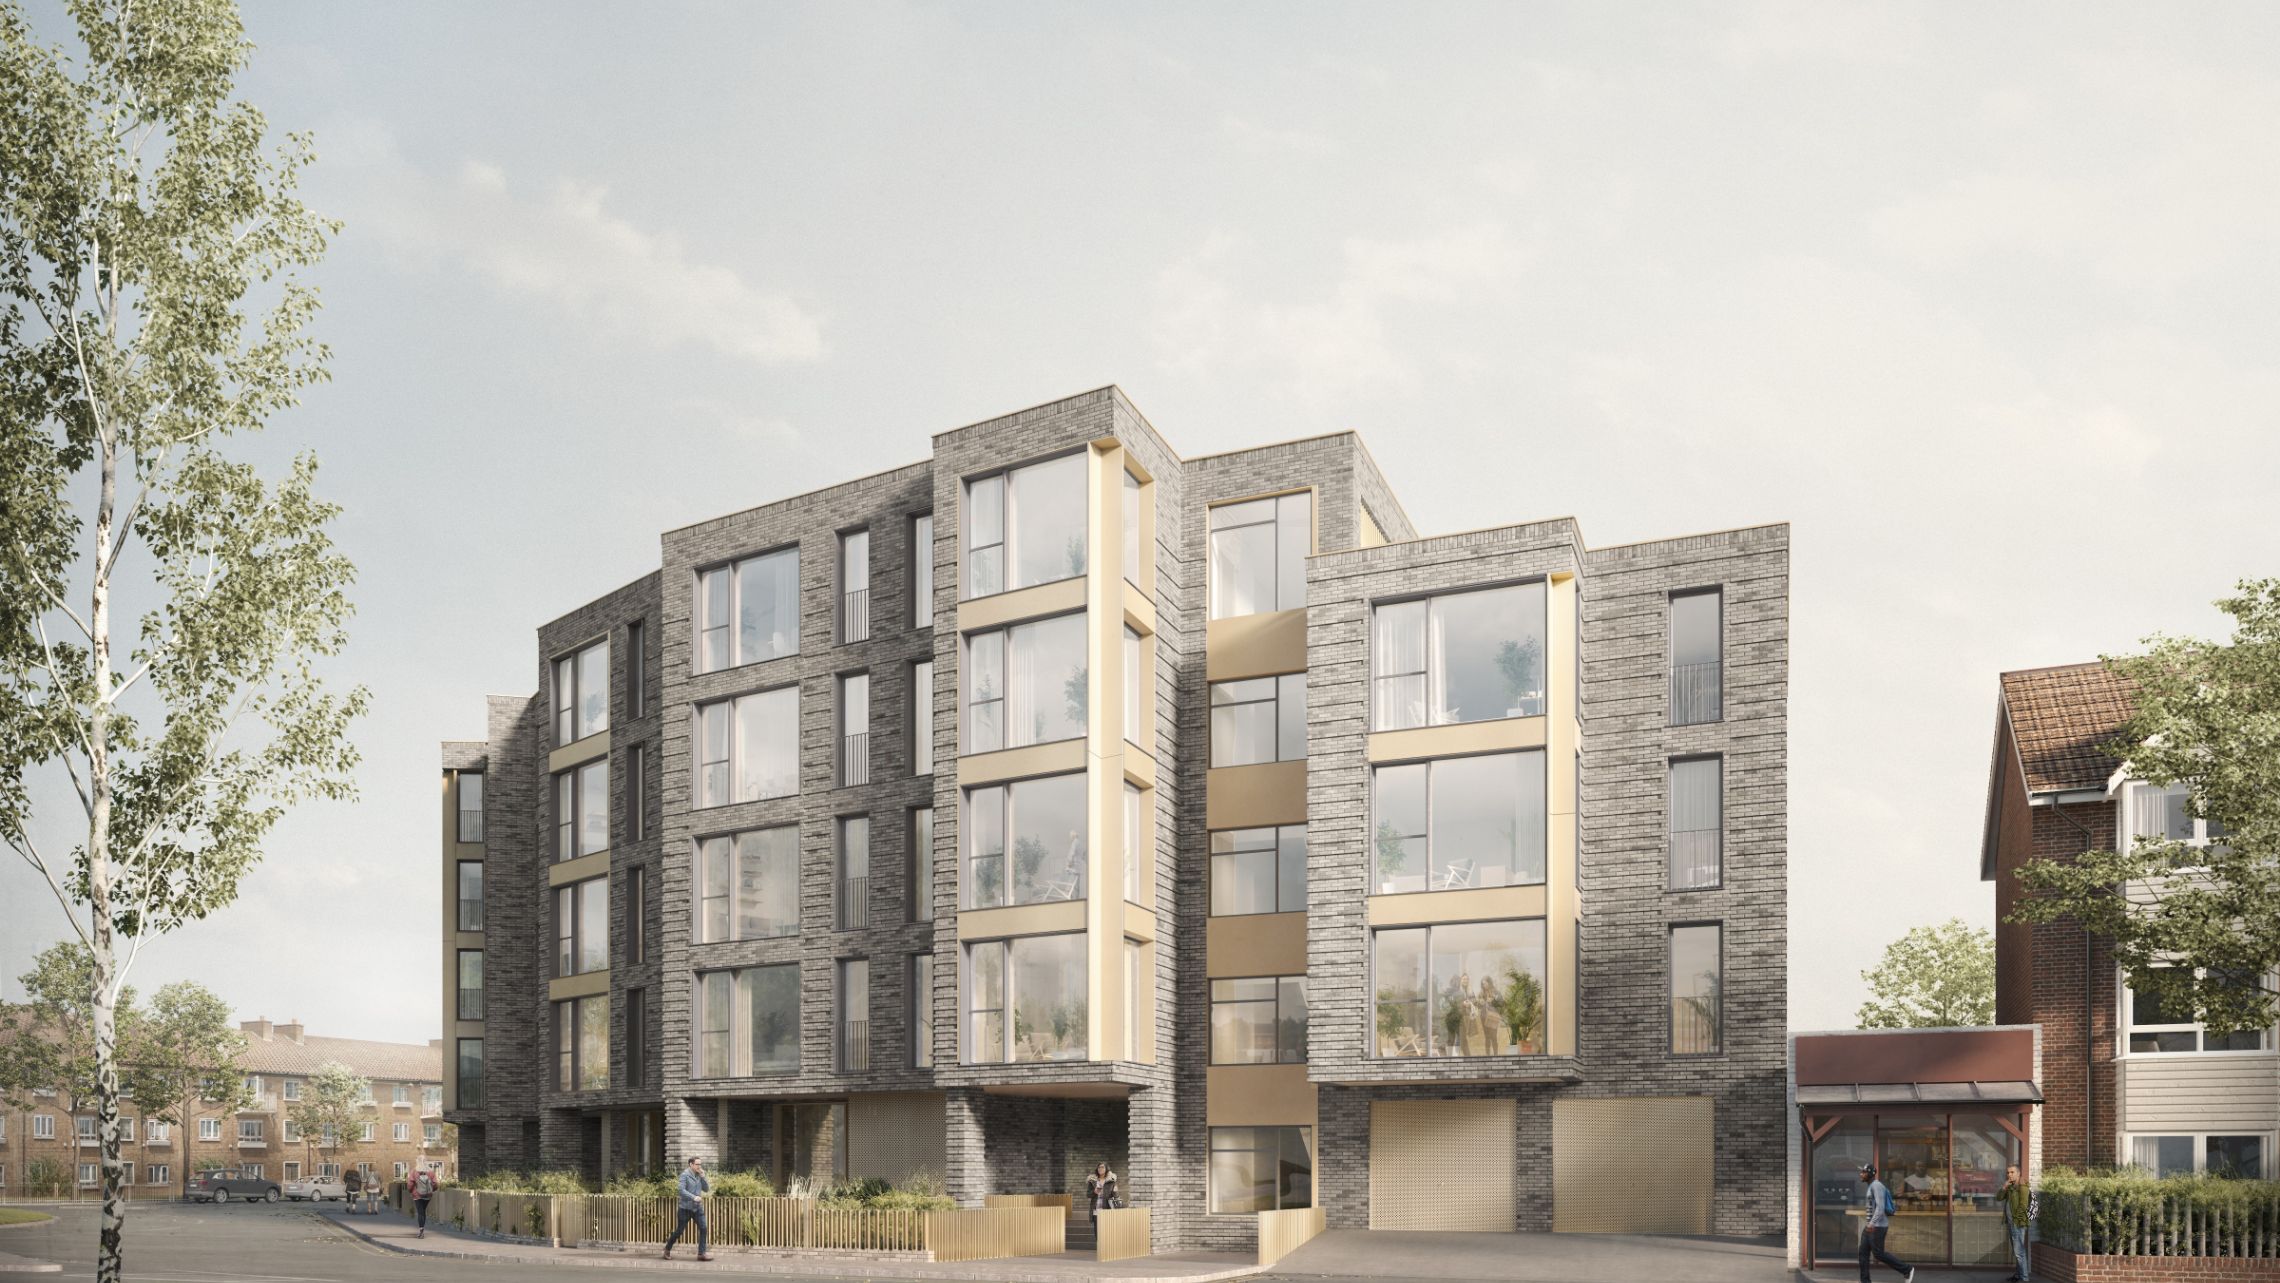 Apartments in north west London, Eastcote